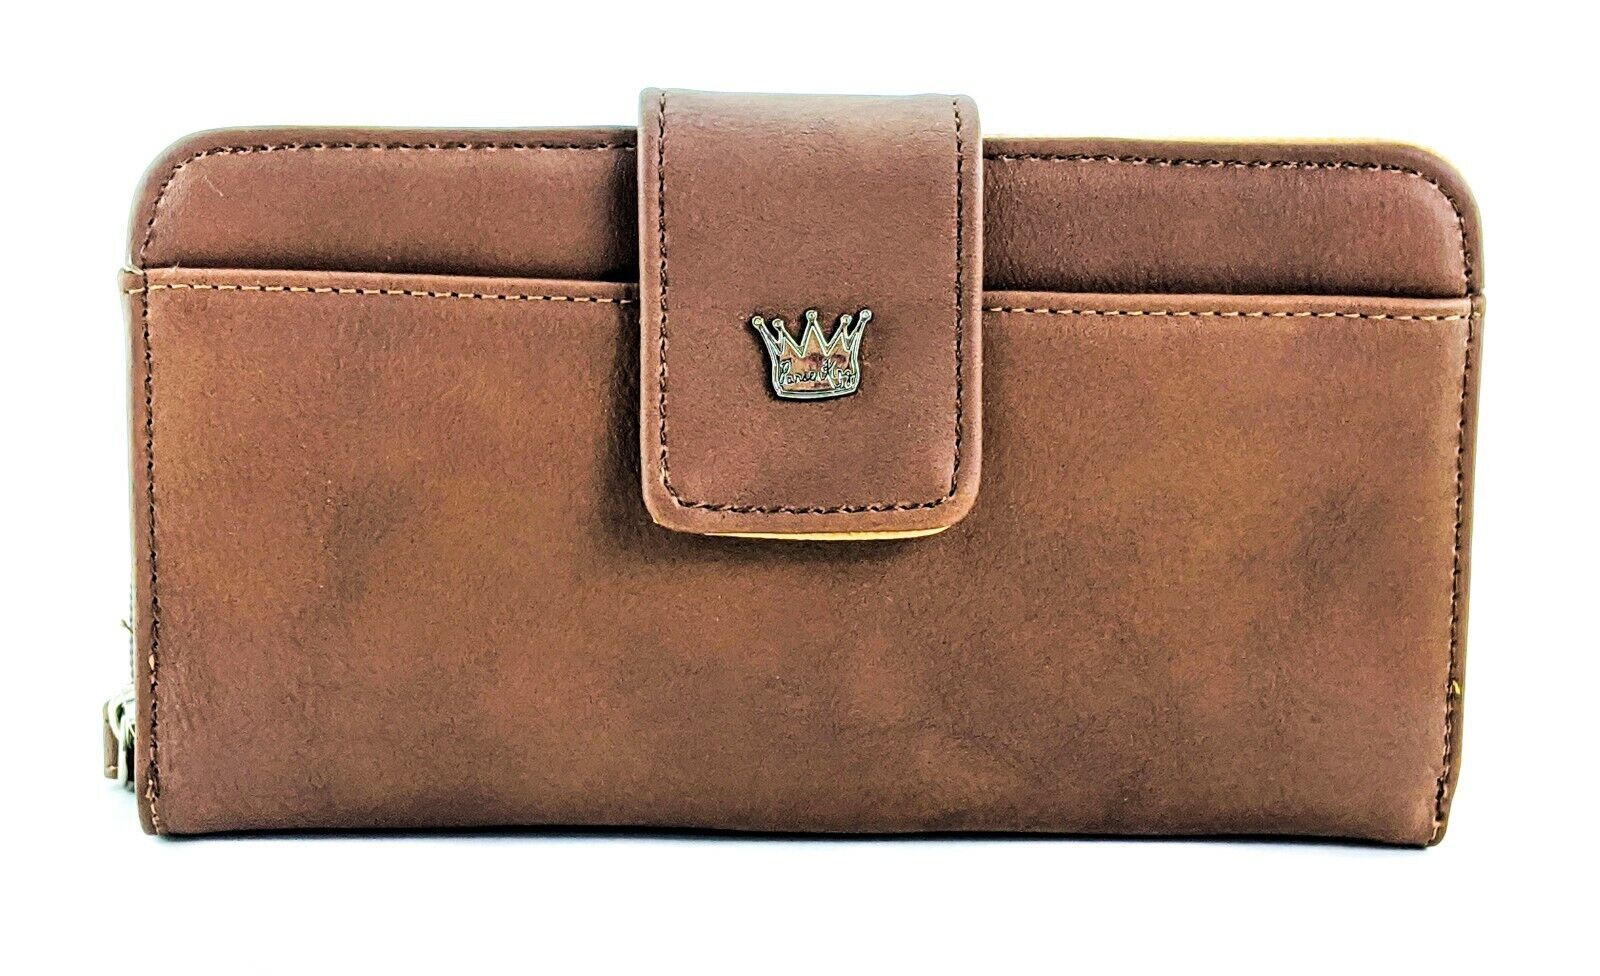 The Essential RFID Blocking Wallet amp; I Photo with Wristlet Max New Orleans Mall 48% OFF 6